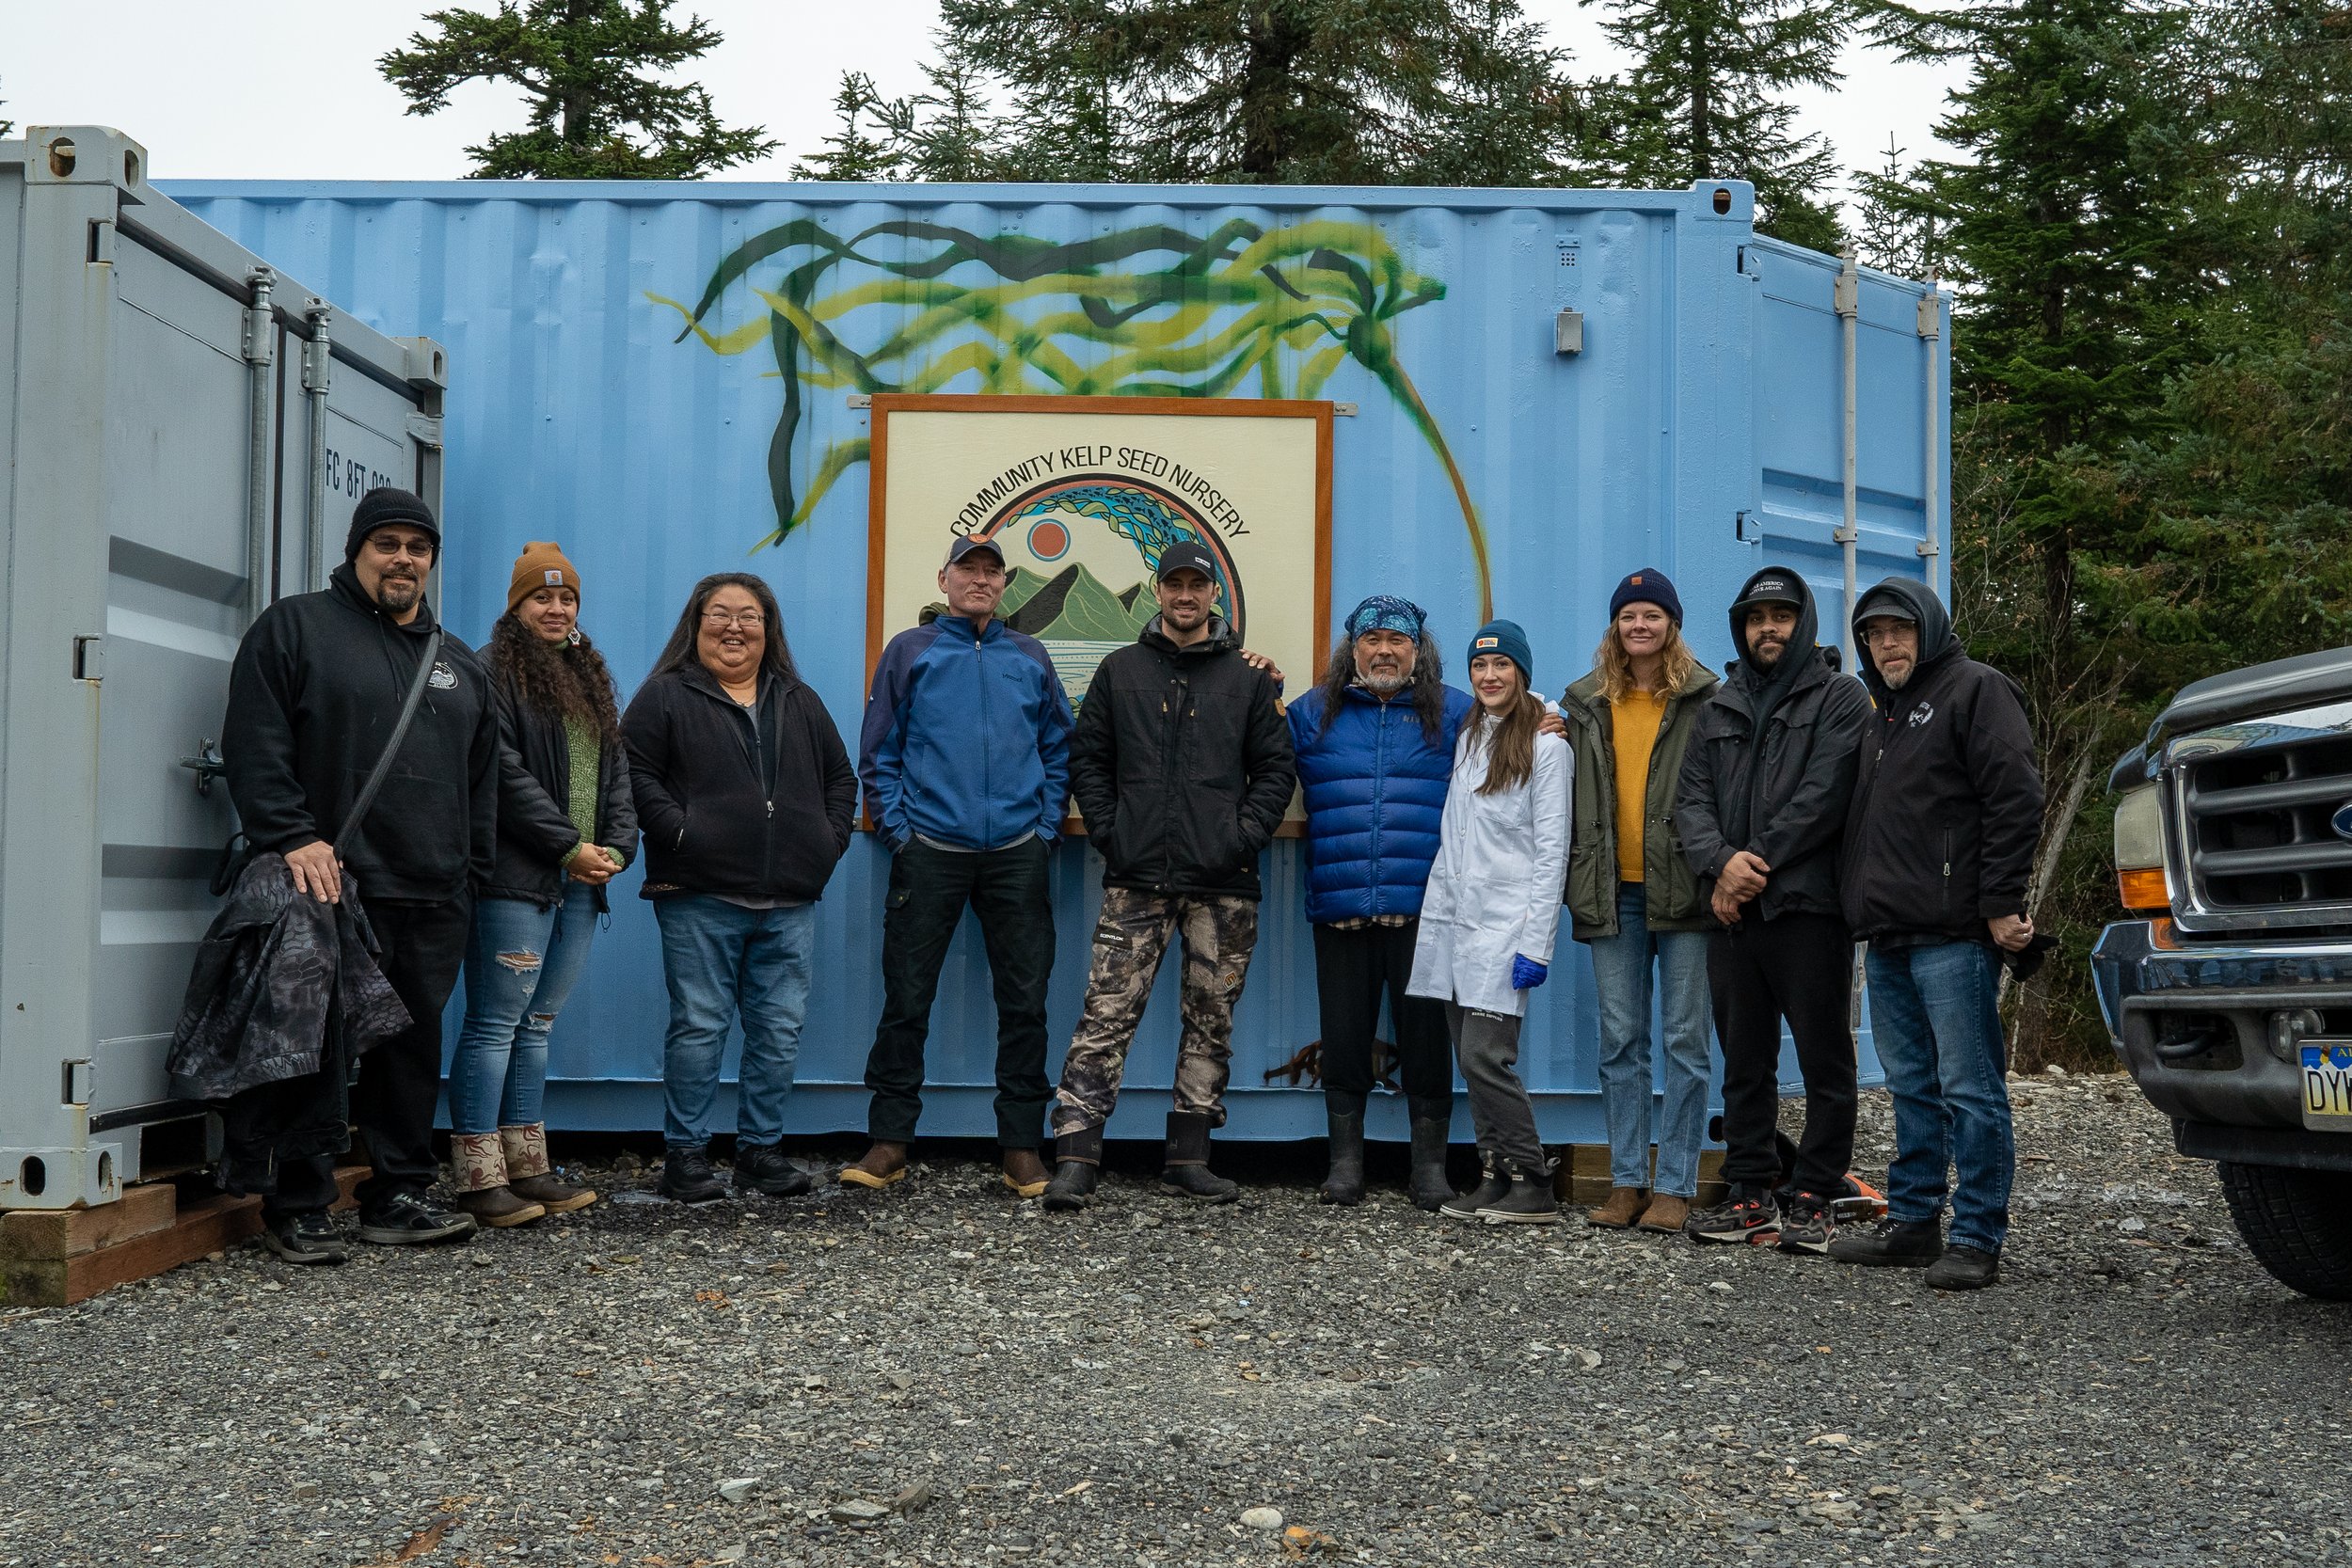 Members of Native Conservancy and their kelp immersion training stand outside their community kelp seed nursery.